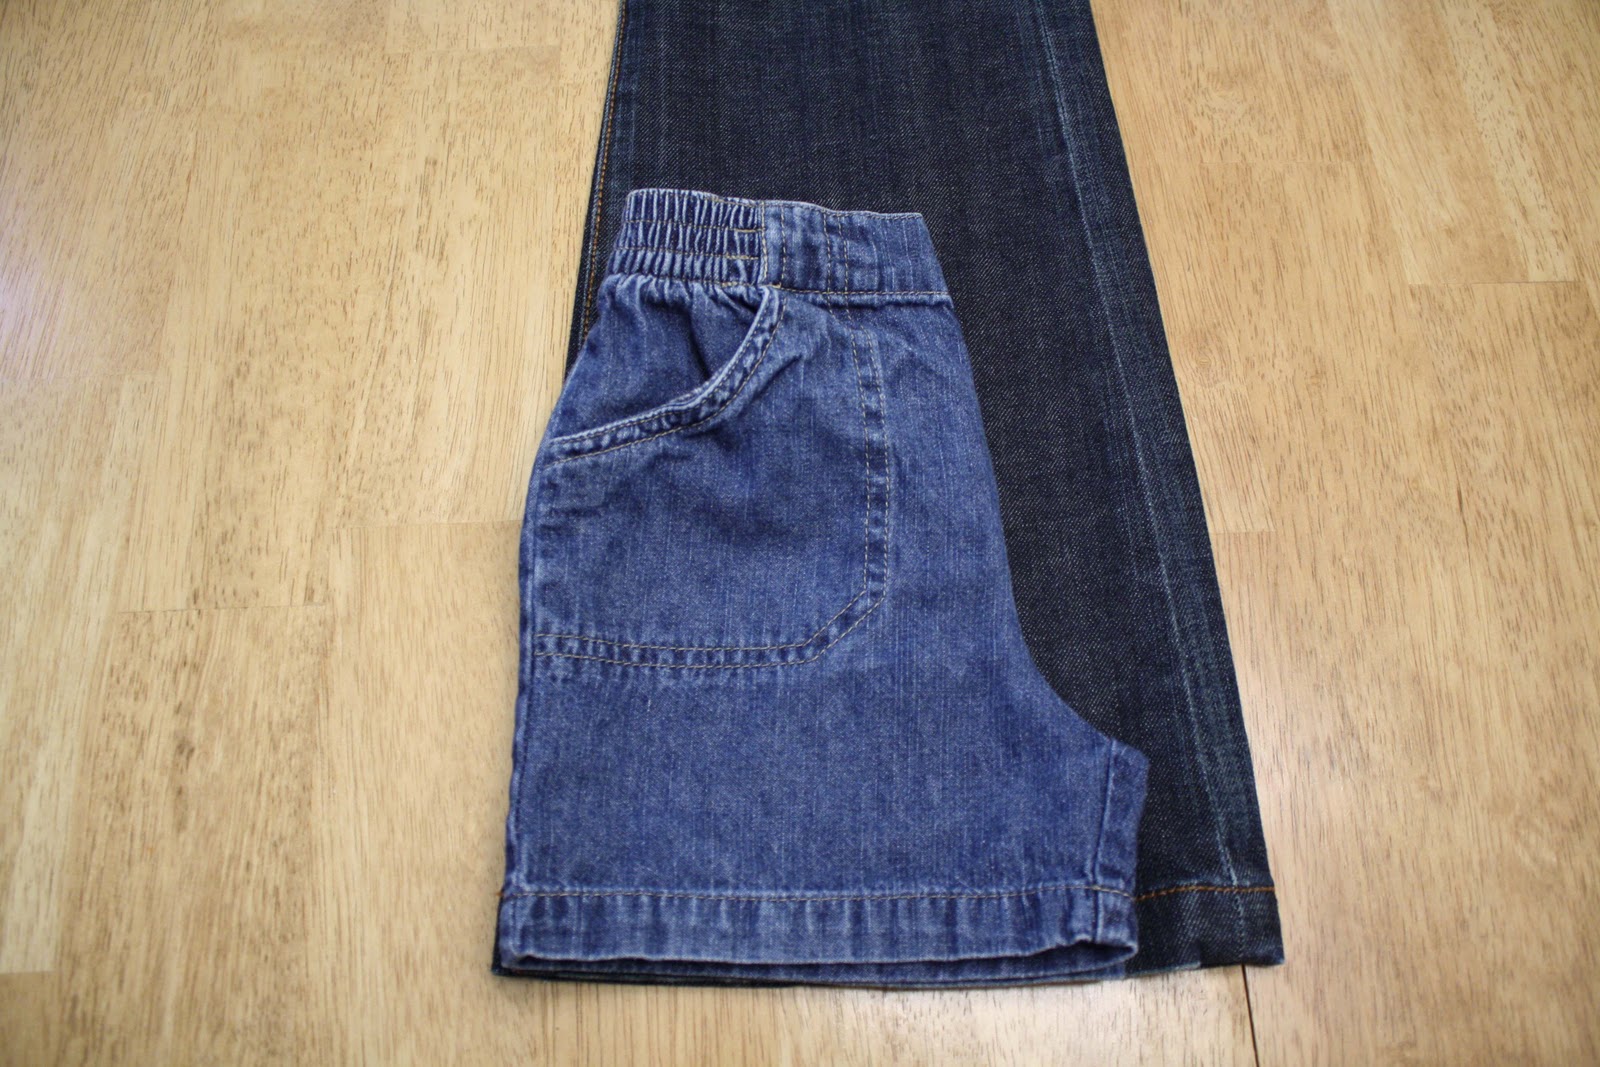 Toddler shorts from jeans legs - Melly Sews